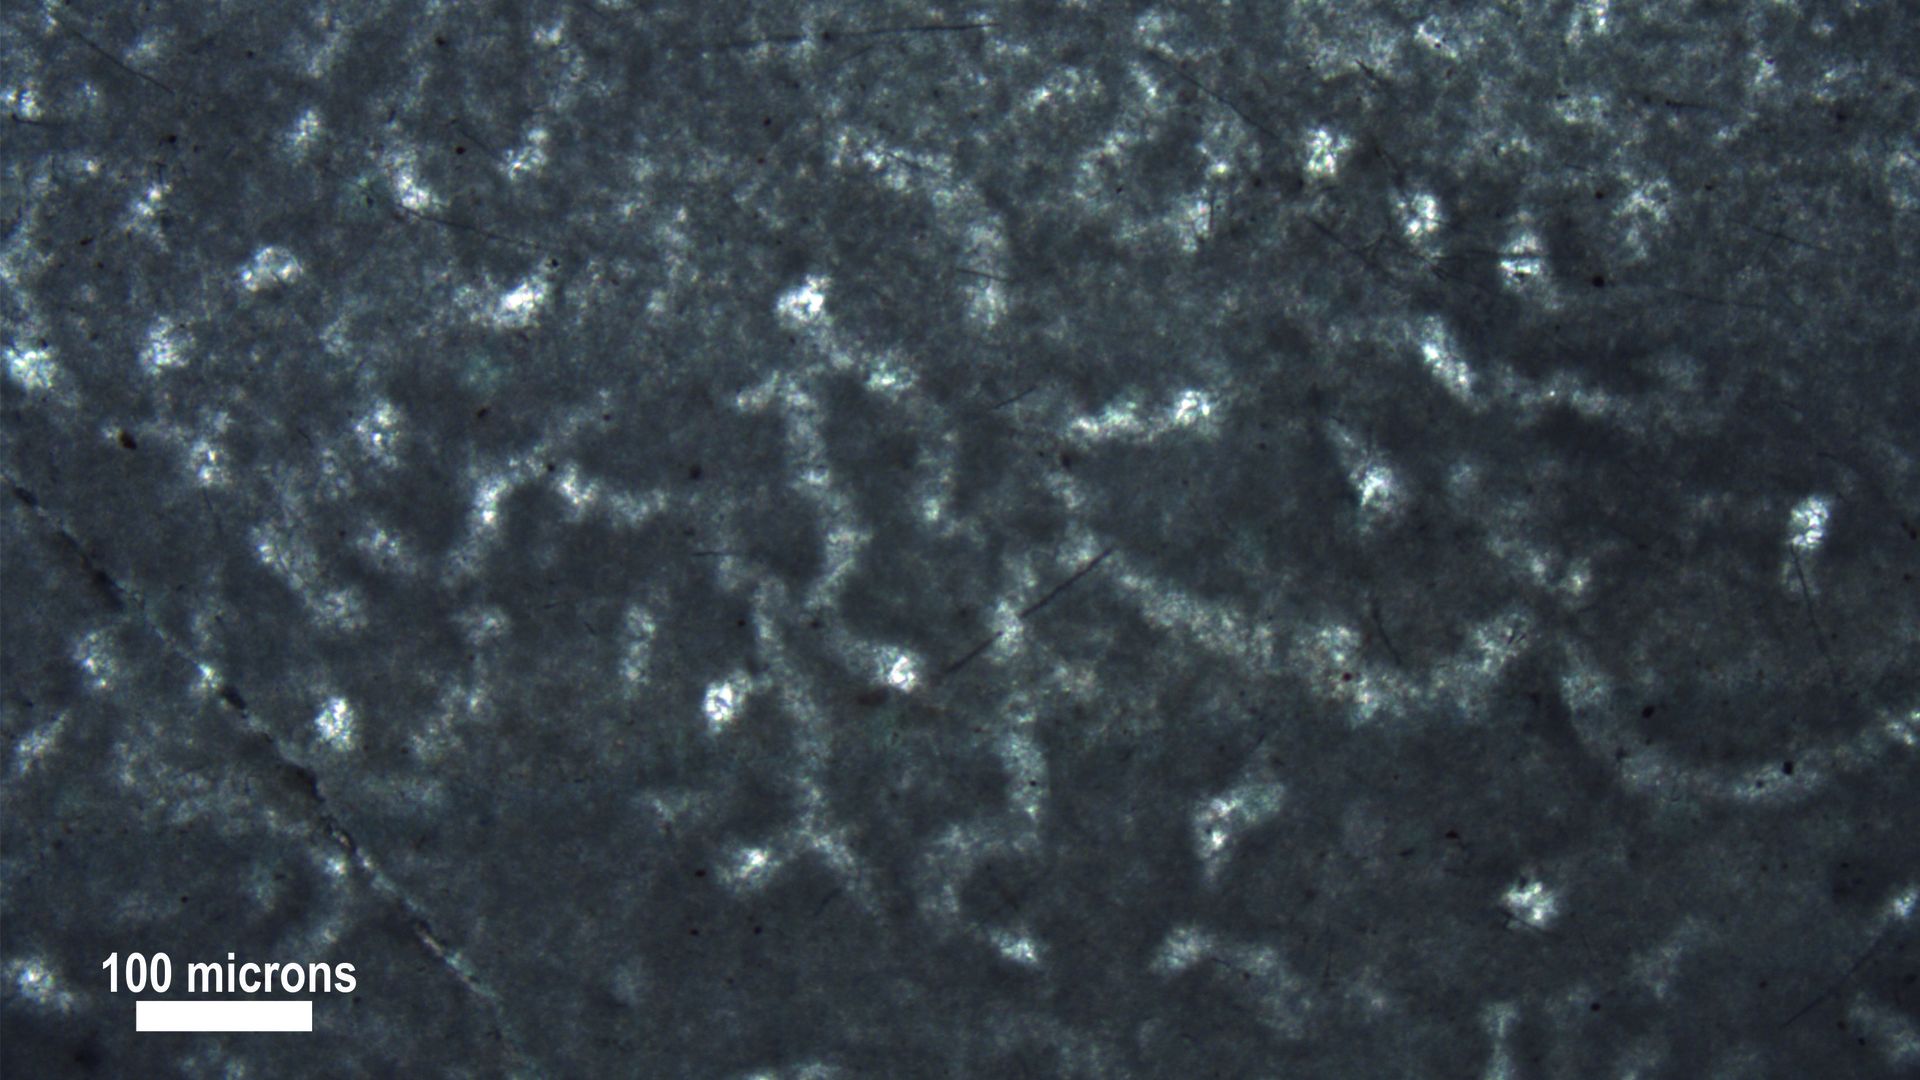 Microscope image of wormlike structures in putative fossils of ancient sea sponges